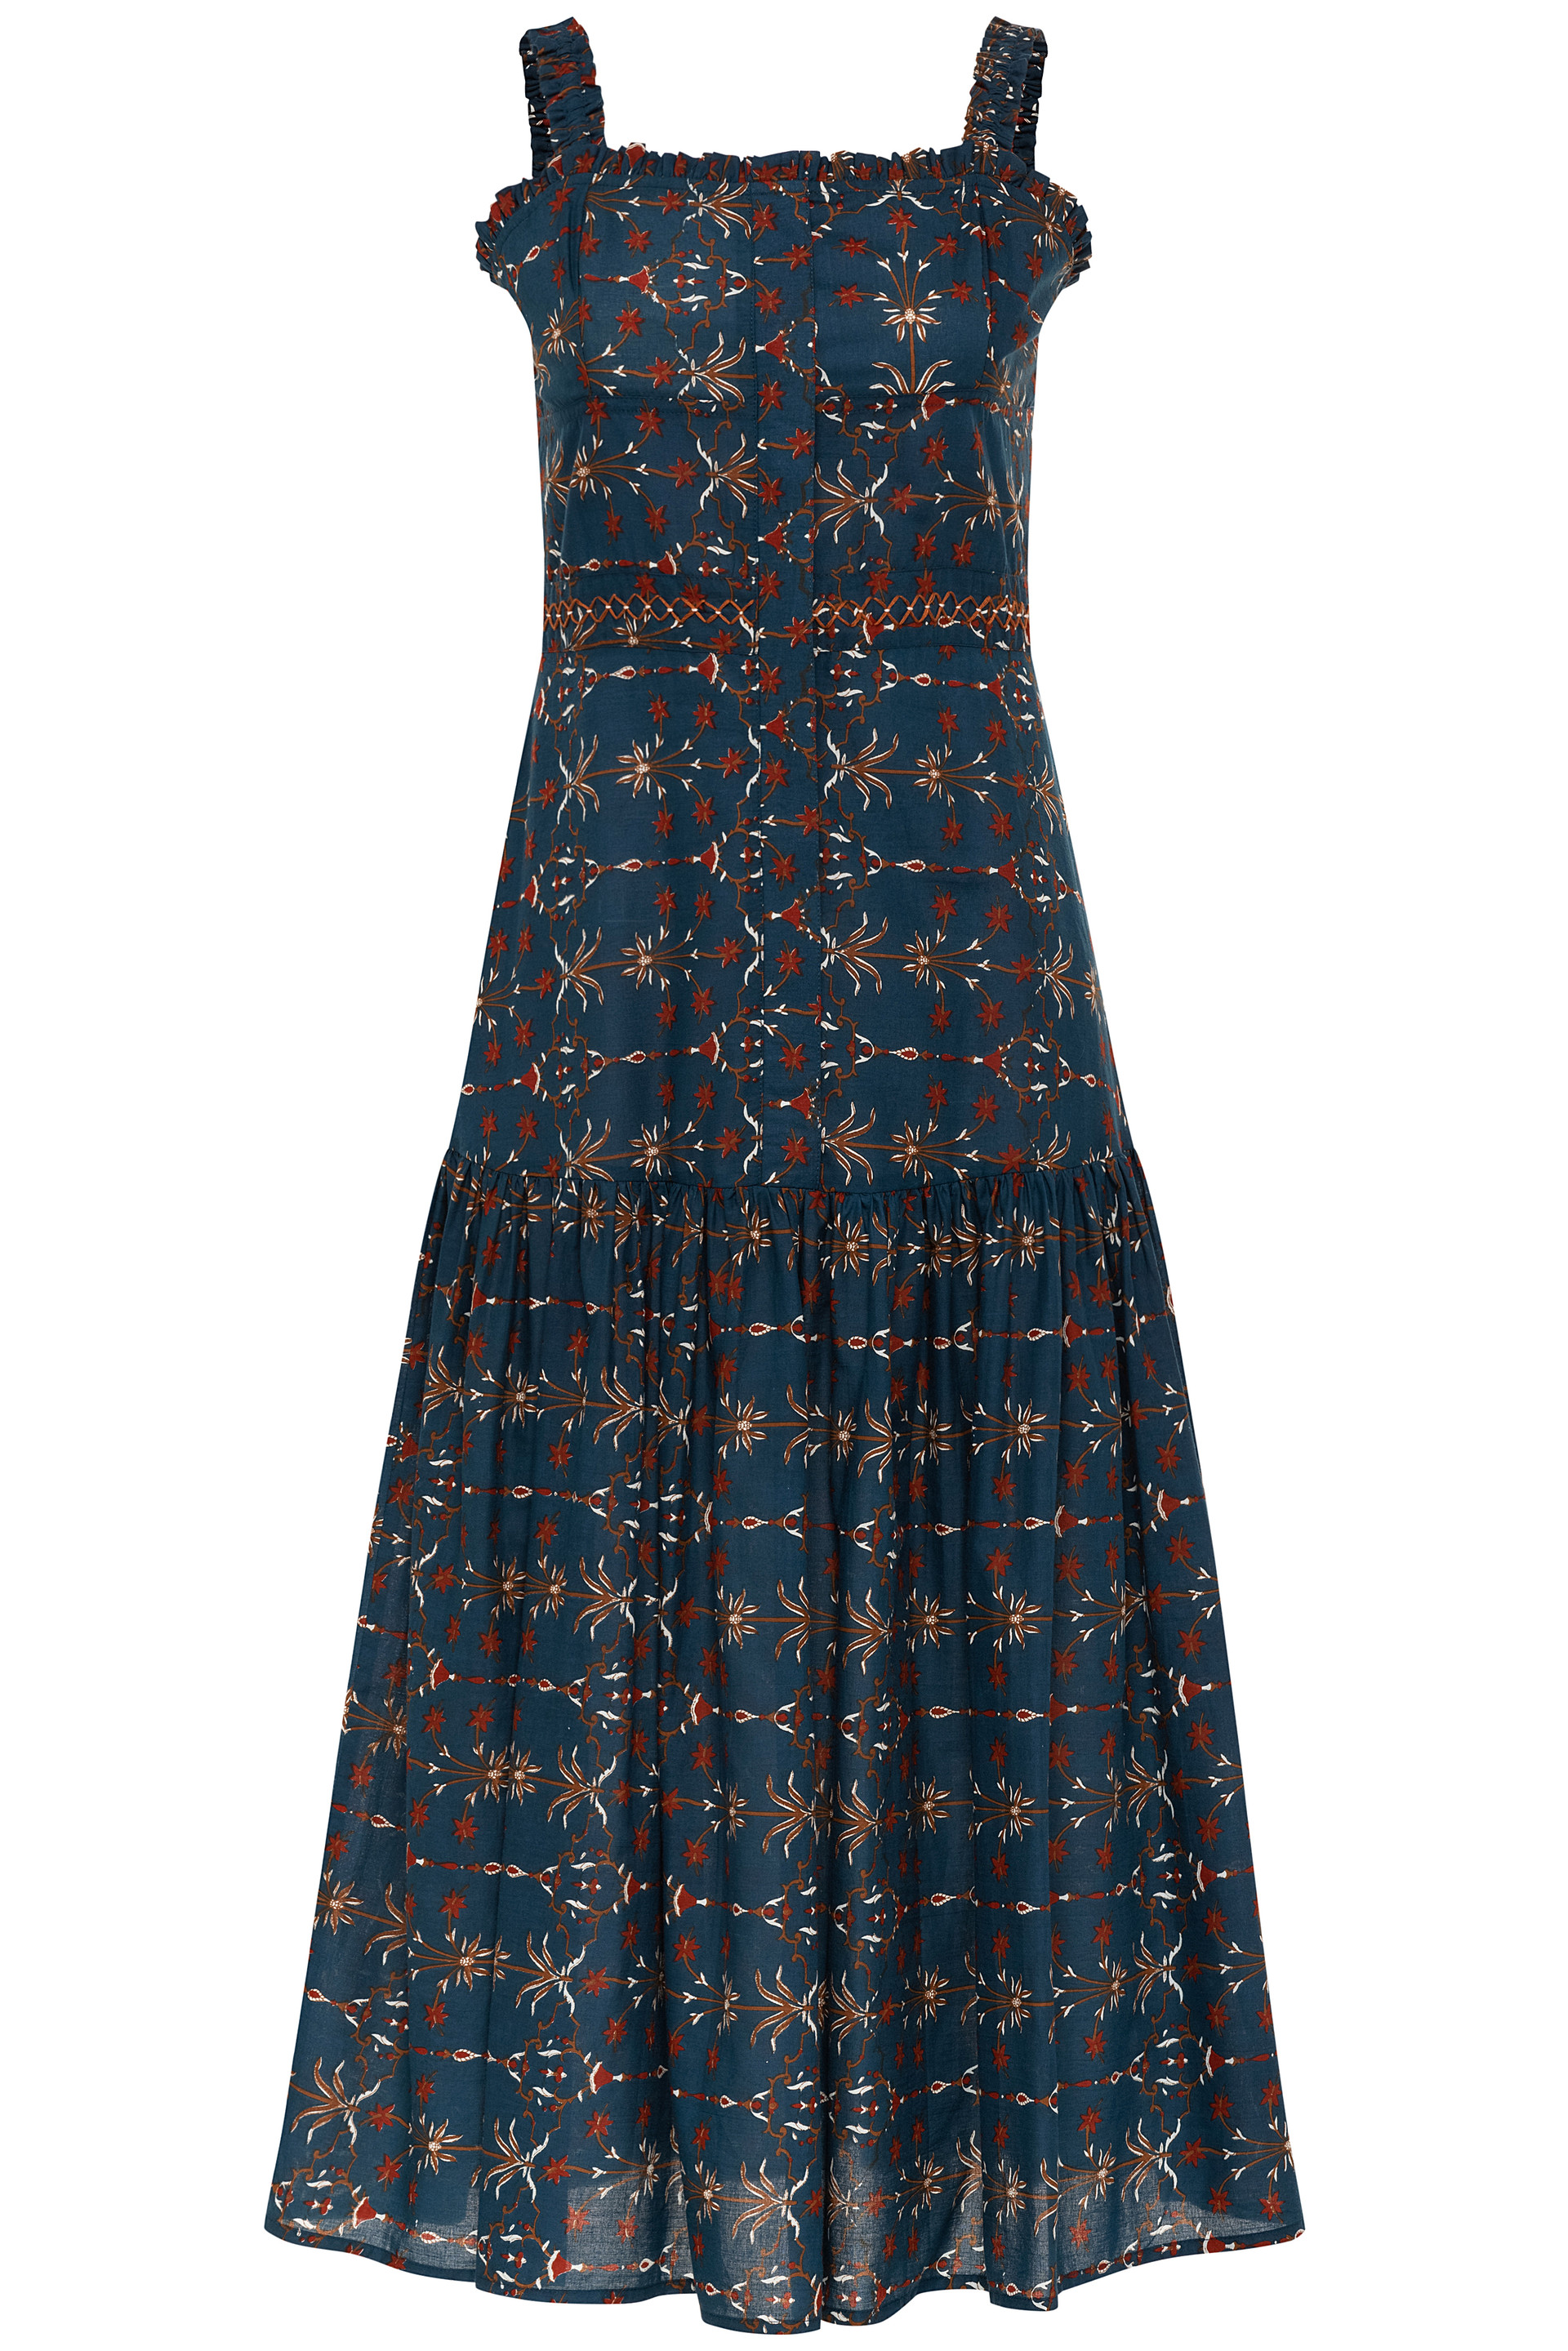 Anna Cate Sophie Dress, Navy Firework - Monkee's of Mount Pleasant